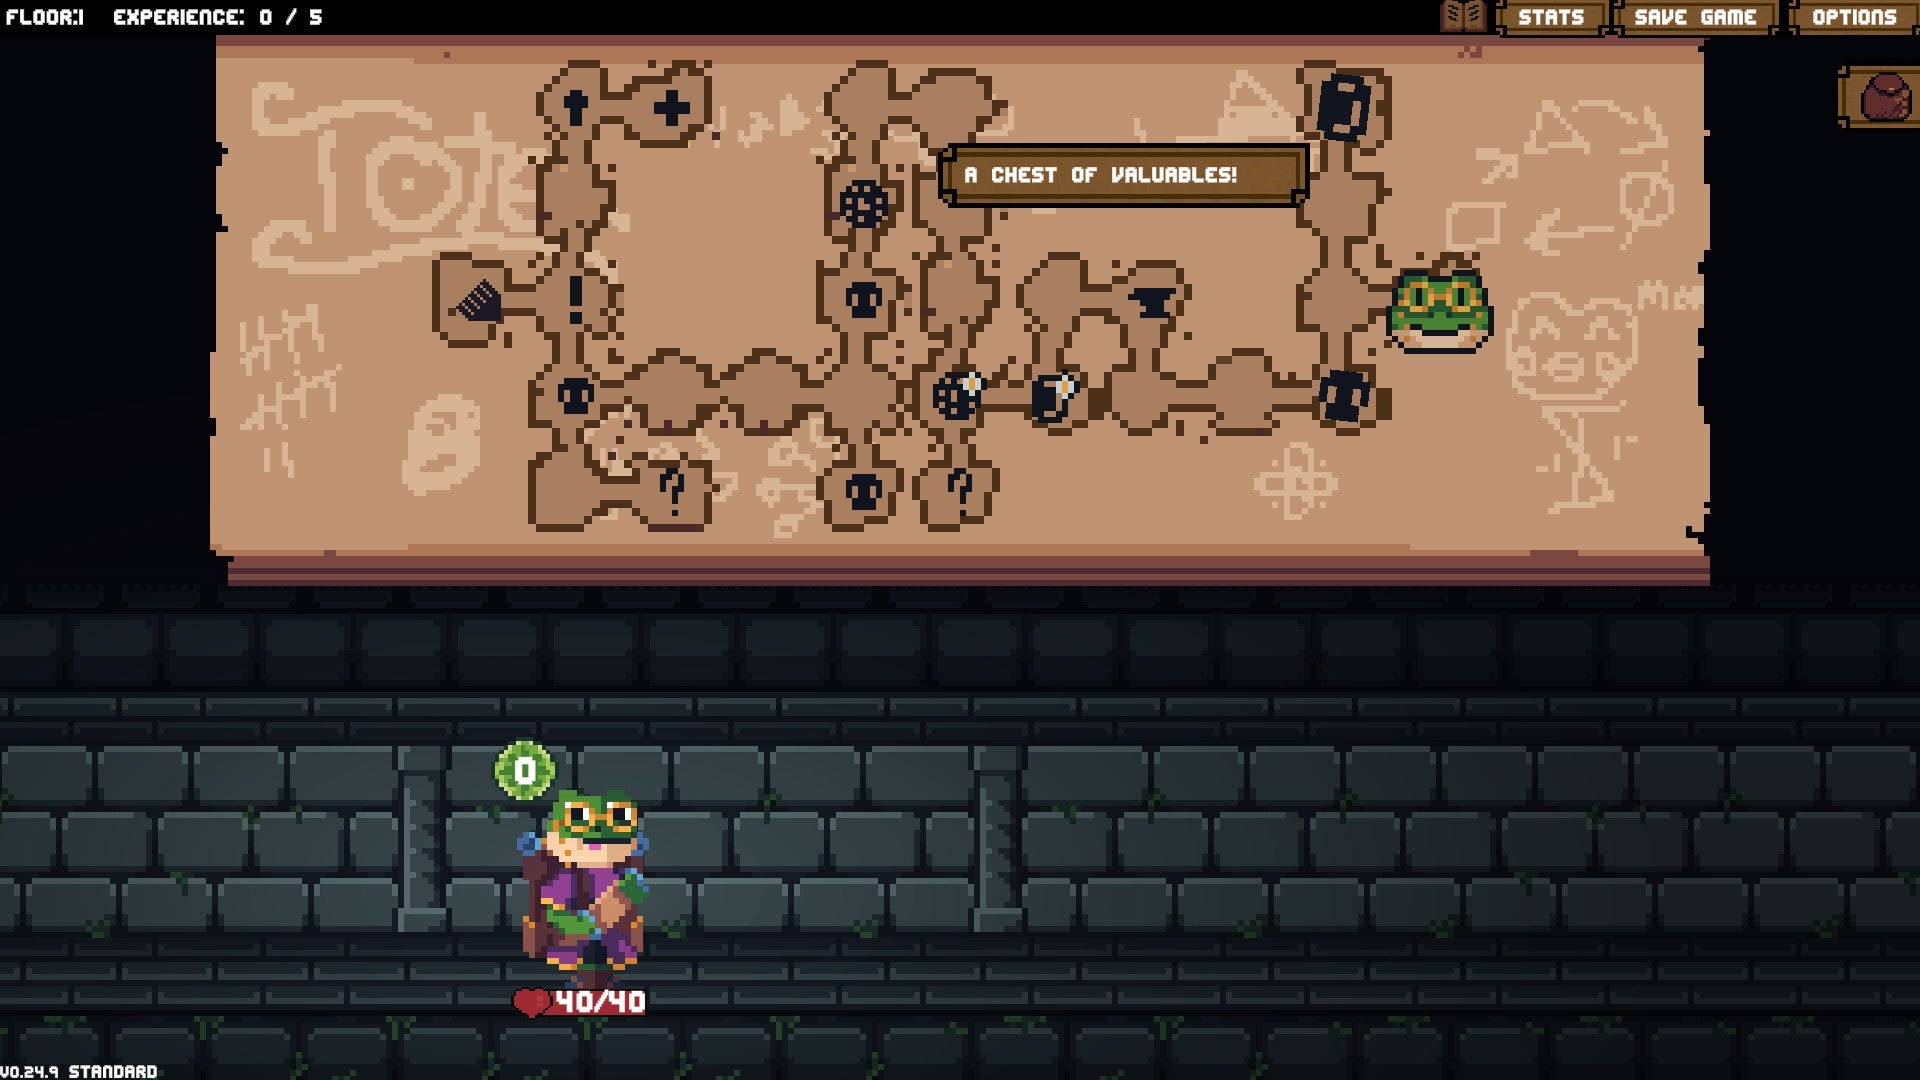 A small frog character stands underneath a large map showing the route through the dungeon and some of the merchants and forges you can encounter along the way.